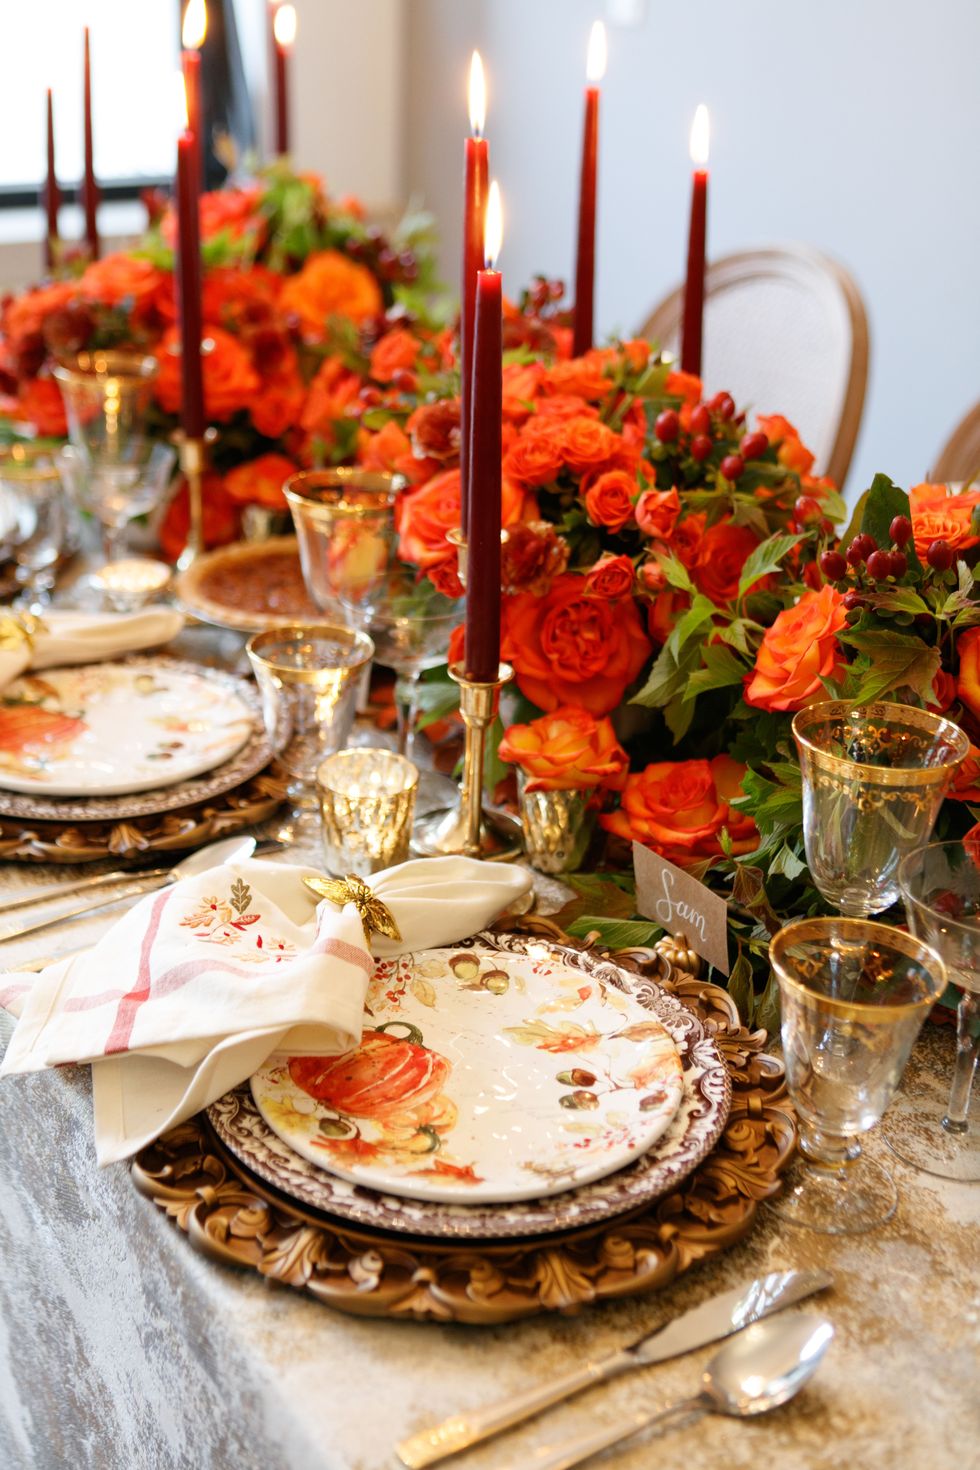 Set a Festive Autumn Table with Leaf Placemats - Quilting Digest in 2023